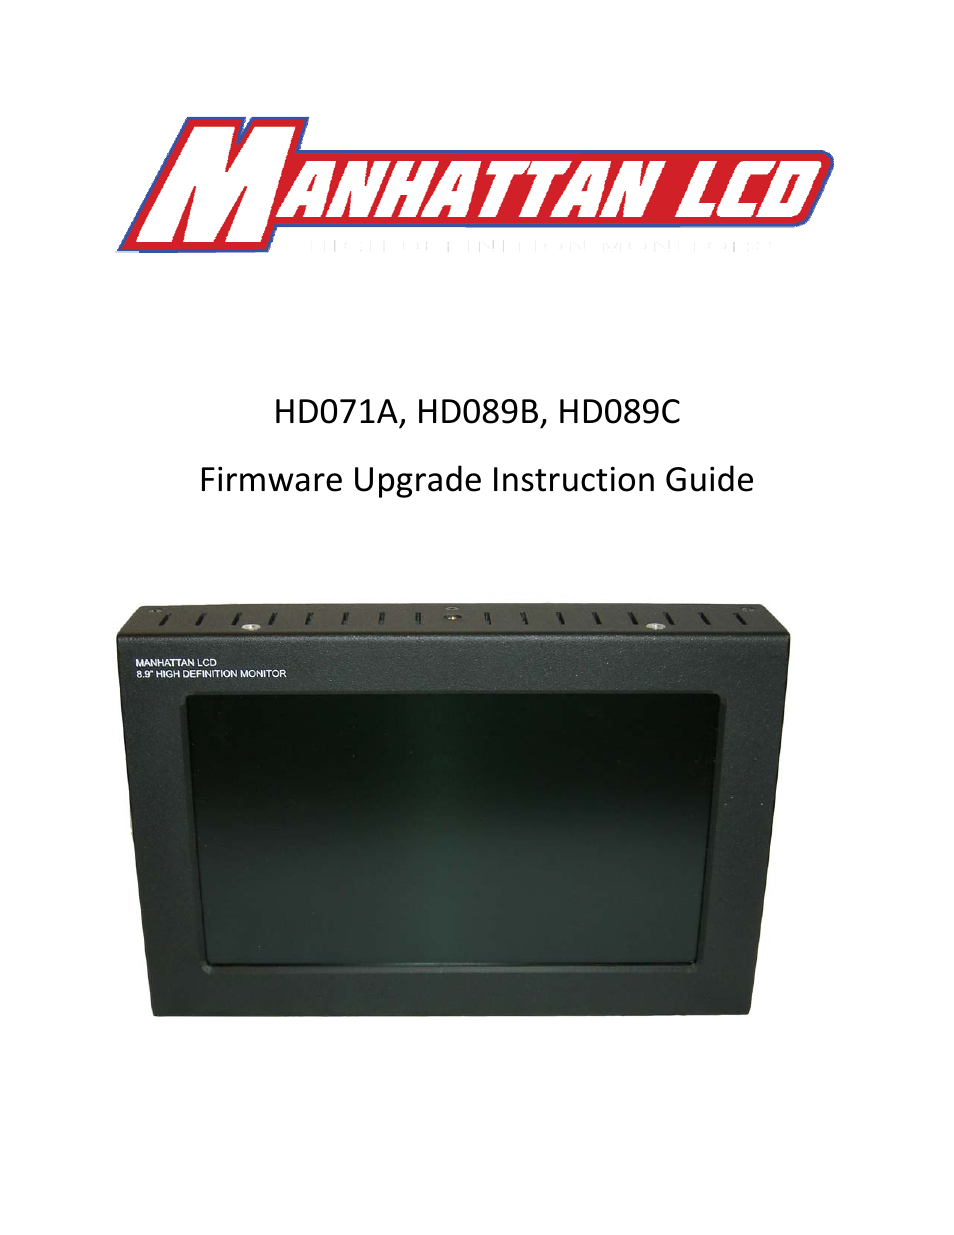 HD071A Firmware Upgrade Instructions